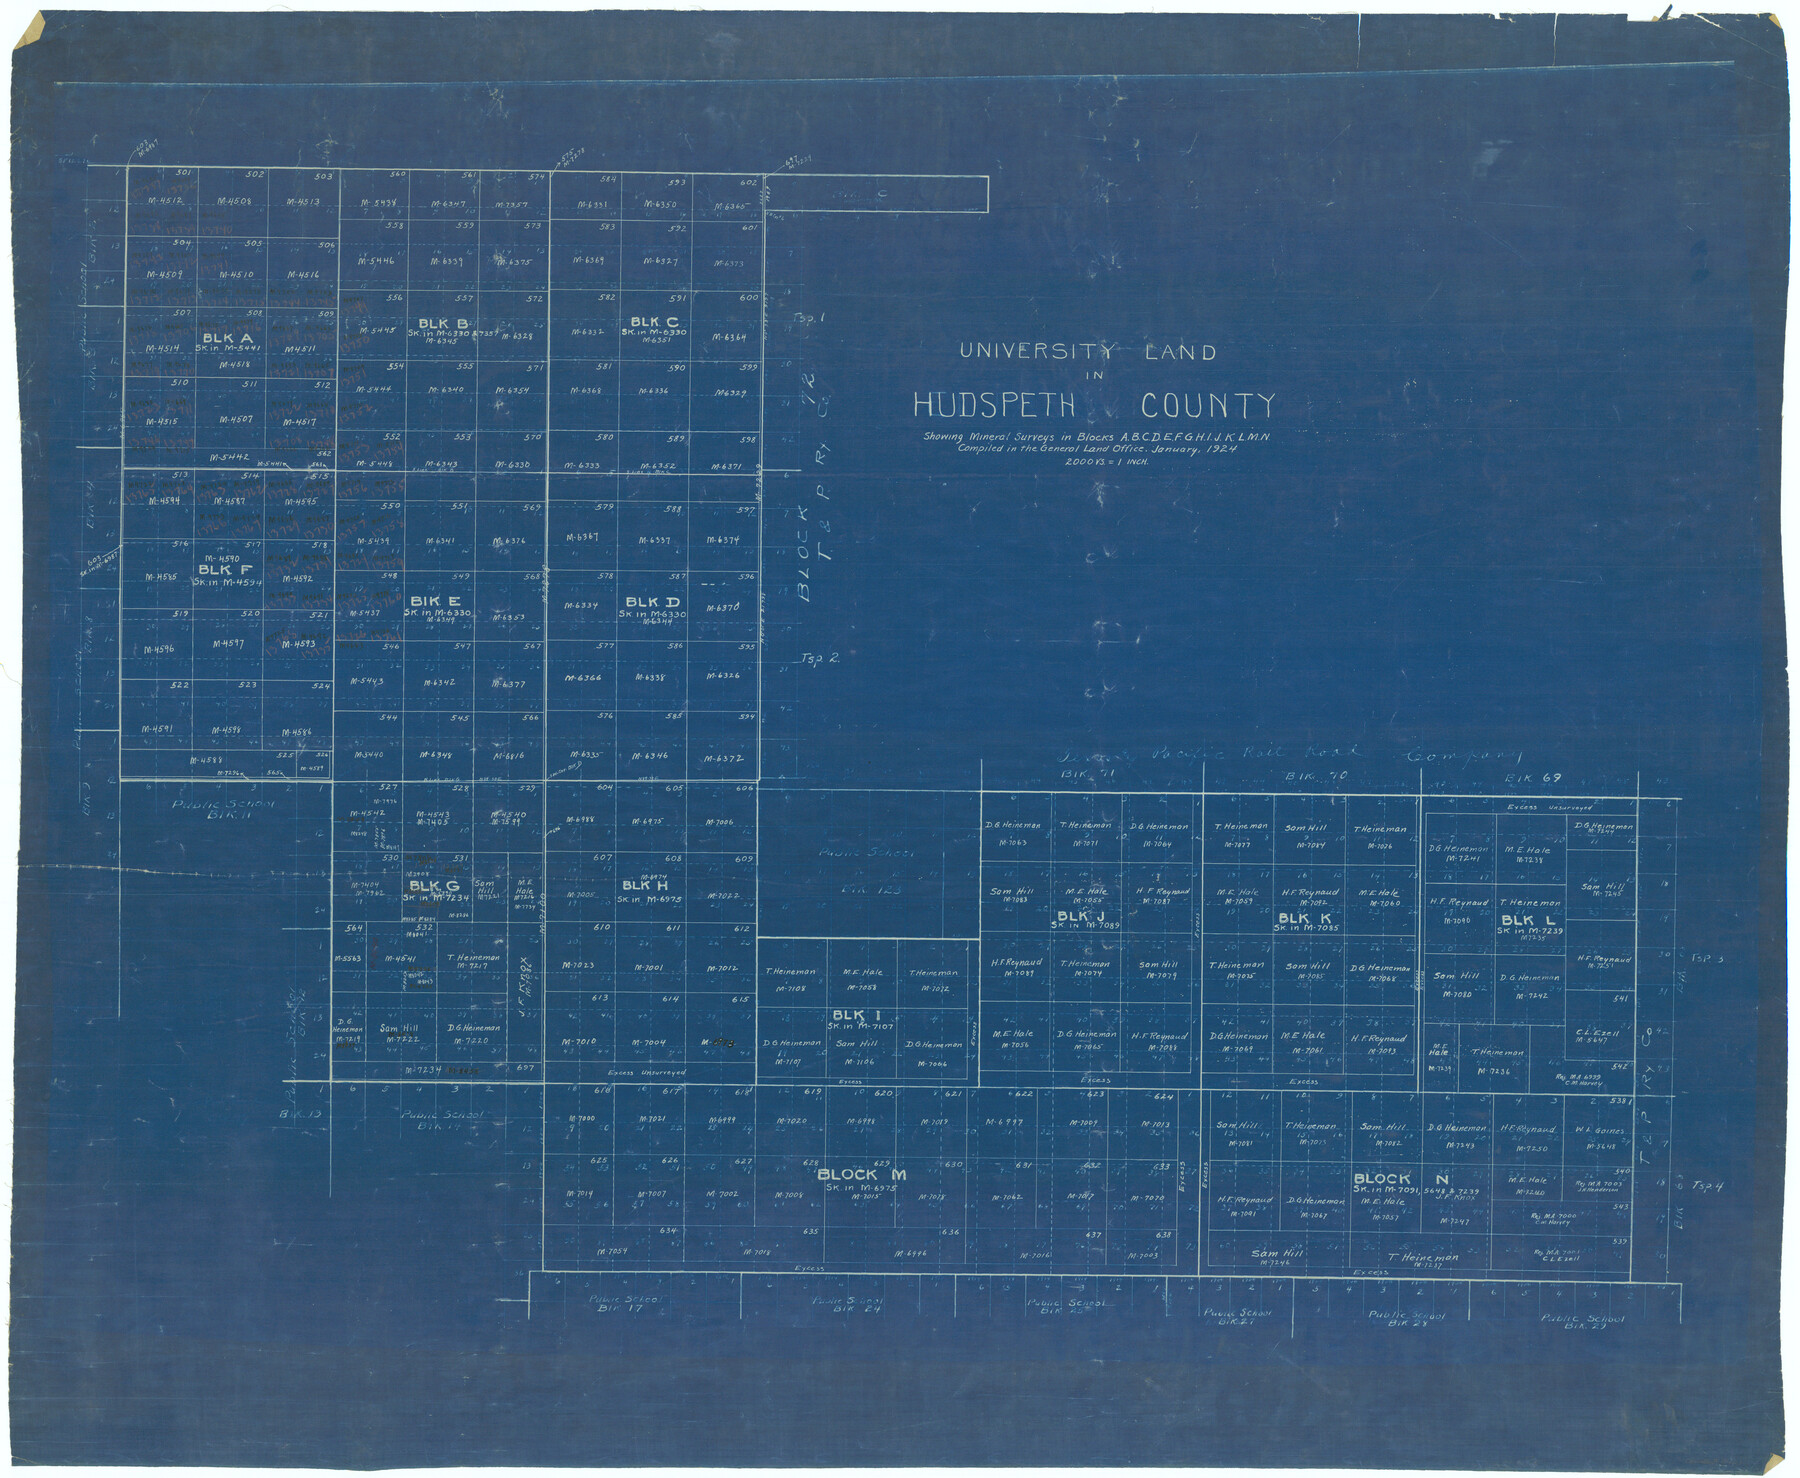 2421, University Land in Hudspeth County showing Mineral Surveys in Blocks A, B, C, D, E, F, G, H, I, J, K, L, M, N, General Map Collection